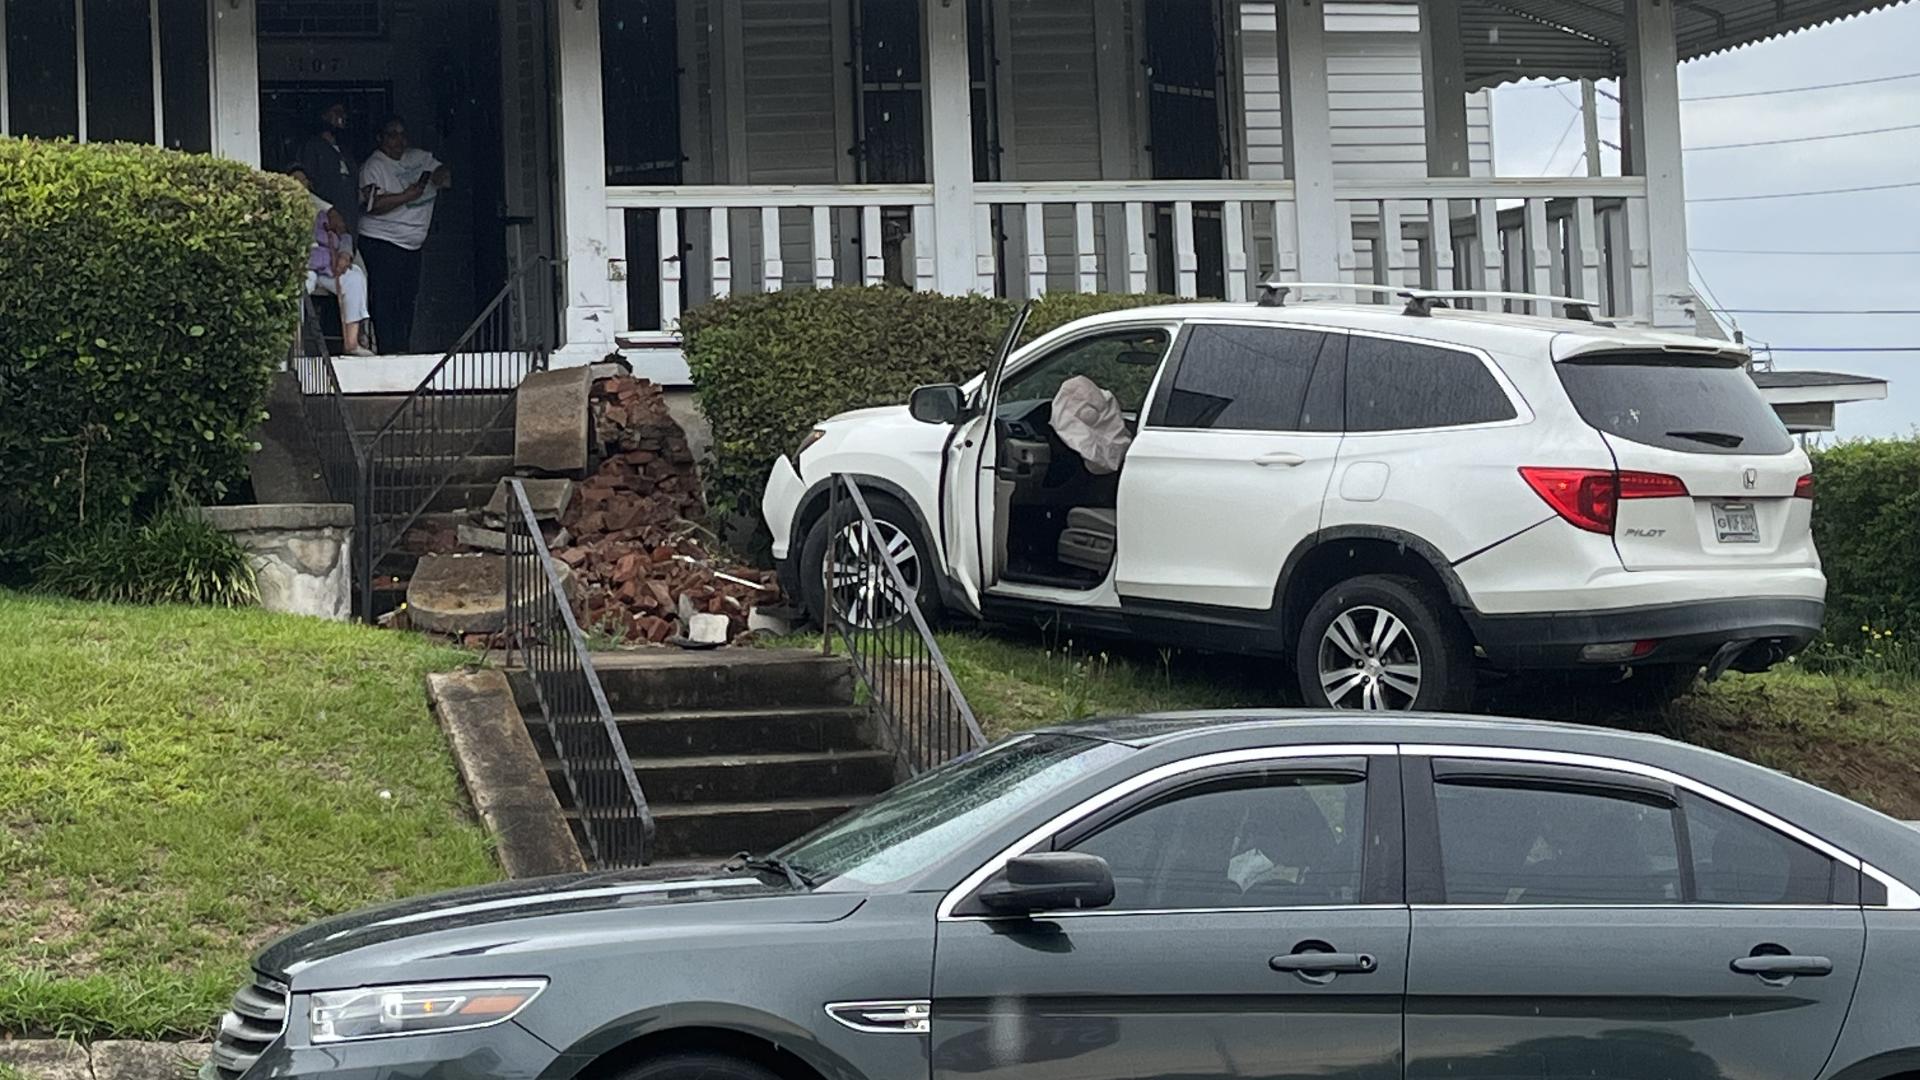 When a deputy attempted to pull the driver over in east Macon, they sped off leading authorities on a chase that eventually ended near downtown Macon.